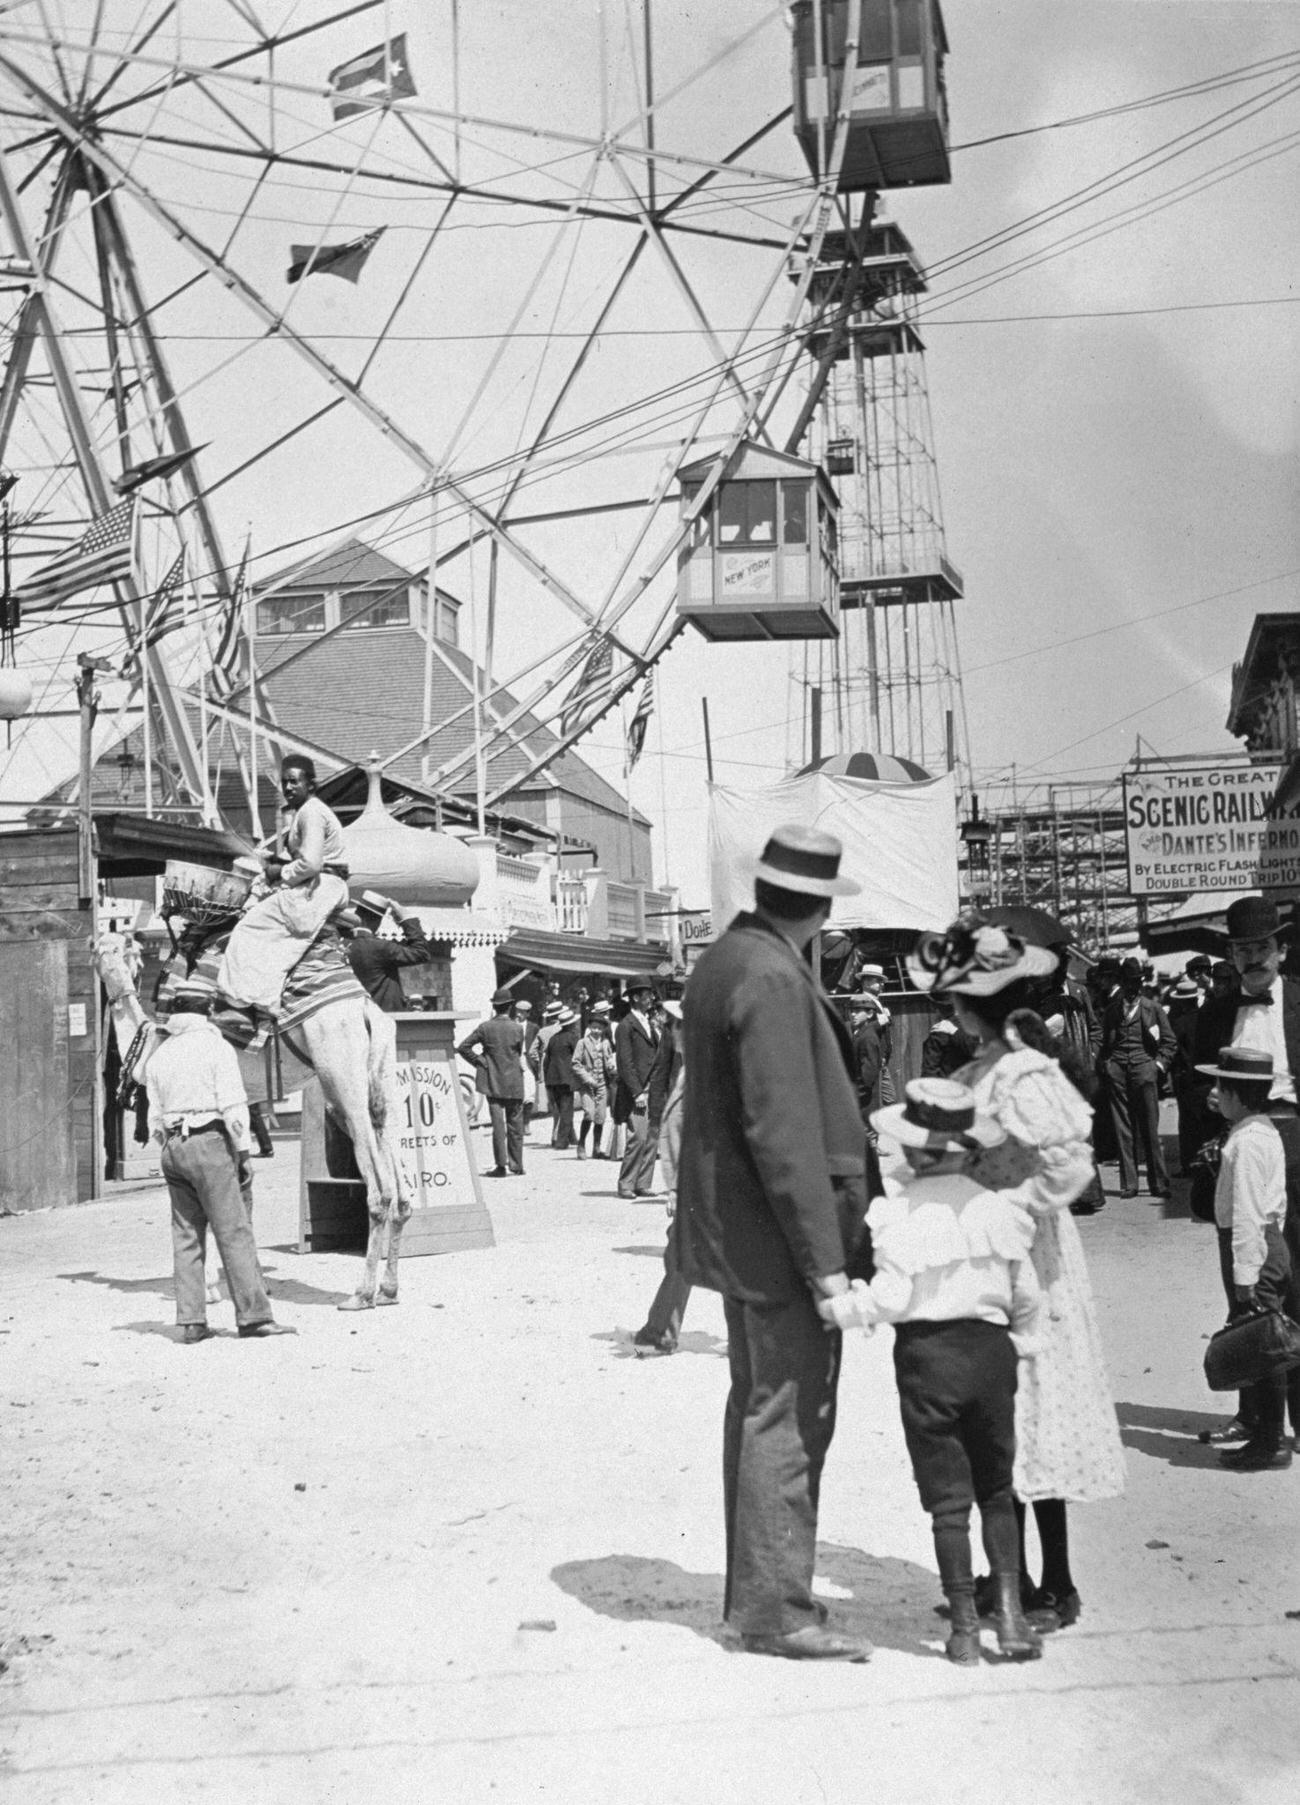 Observing A Man On A Camel And Ferris Wheel At Coney Island, Brooklyn, 1896